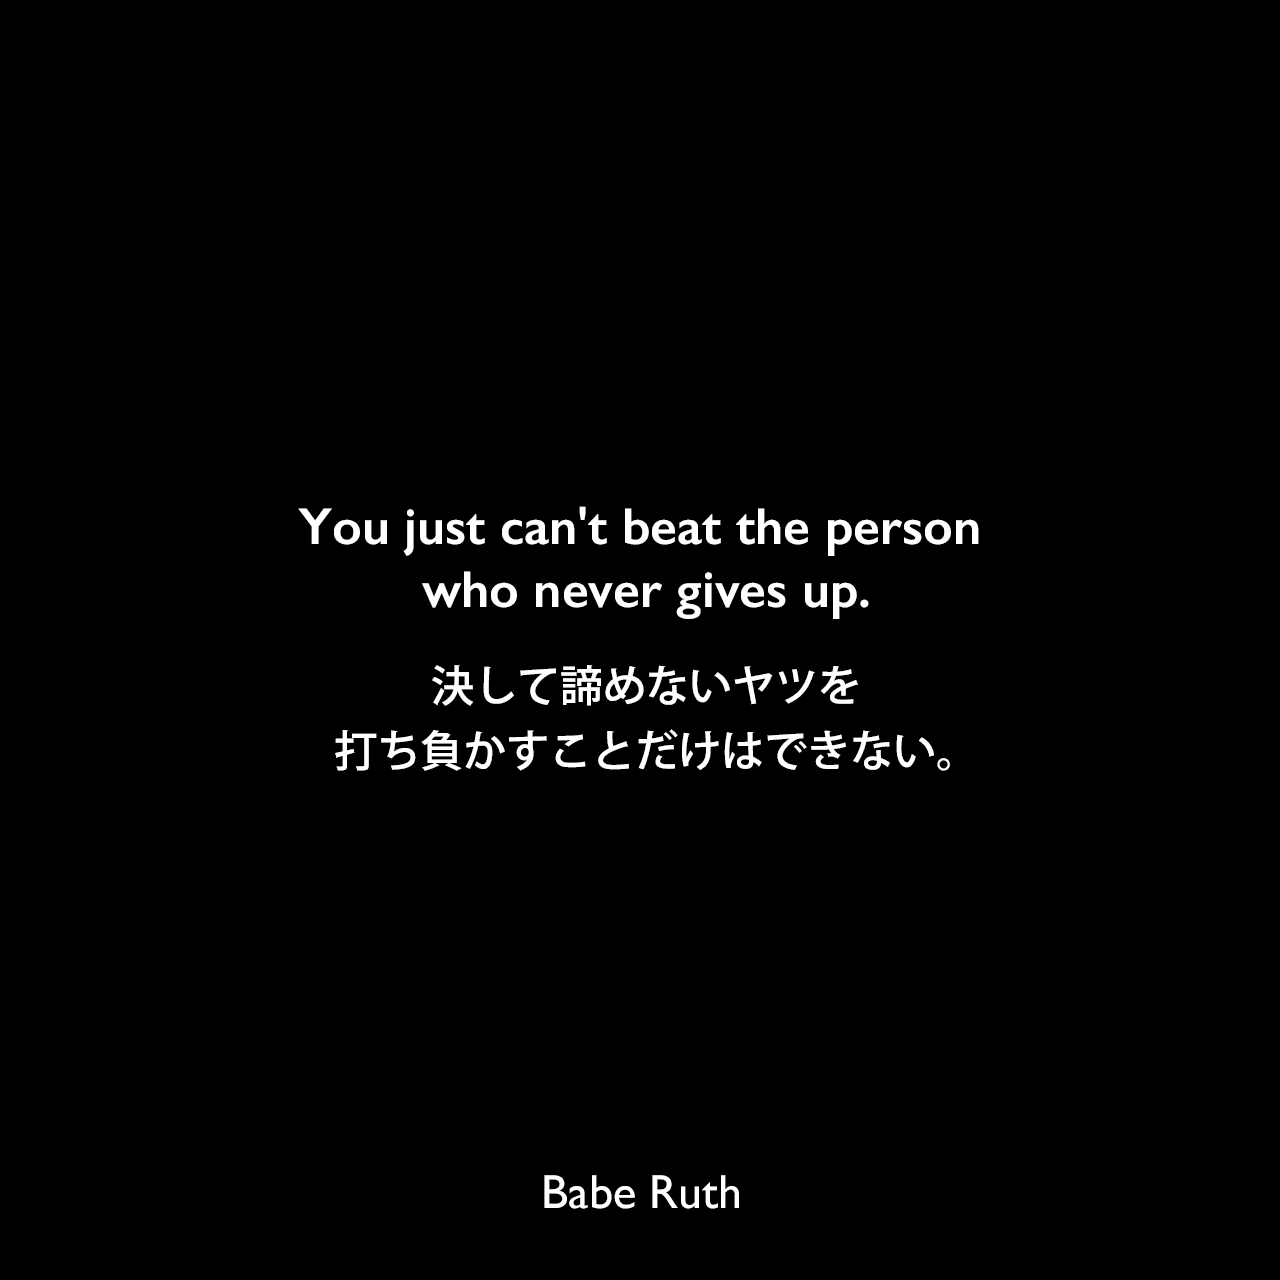 You just can’t beat the person who never gives up.決して諦めないヤツを打ち負かすことだけはできない。